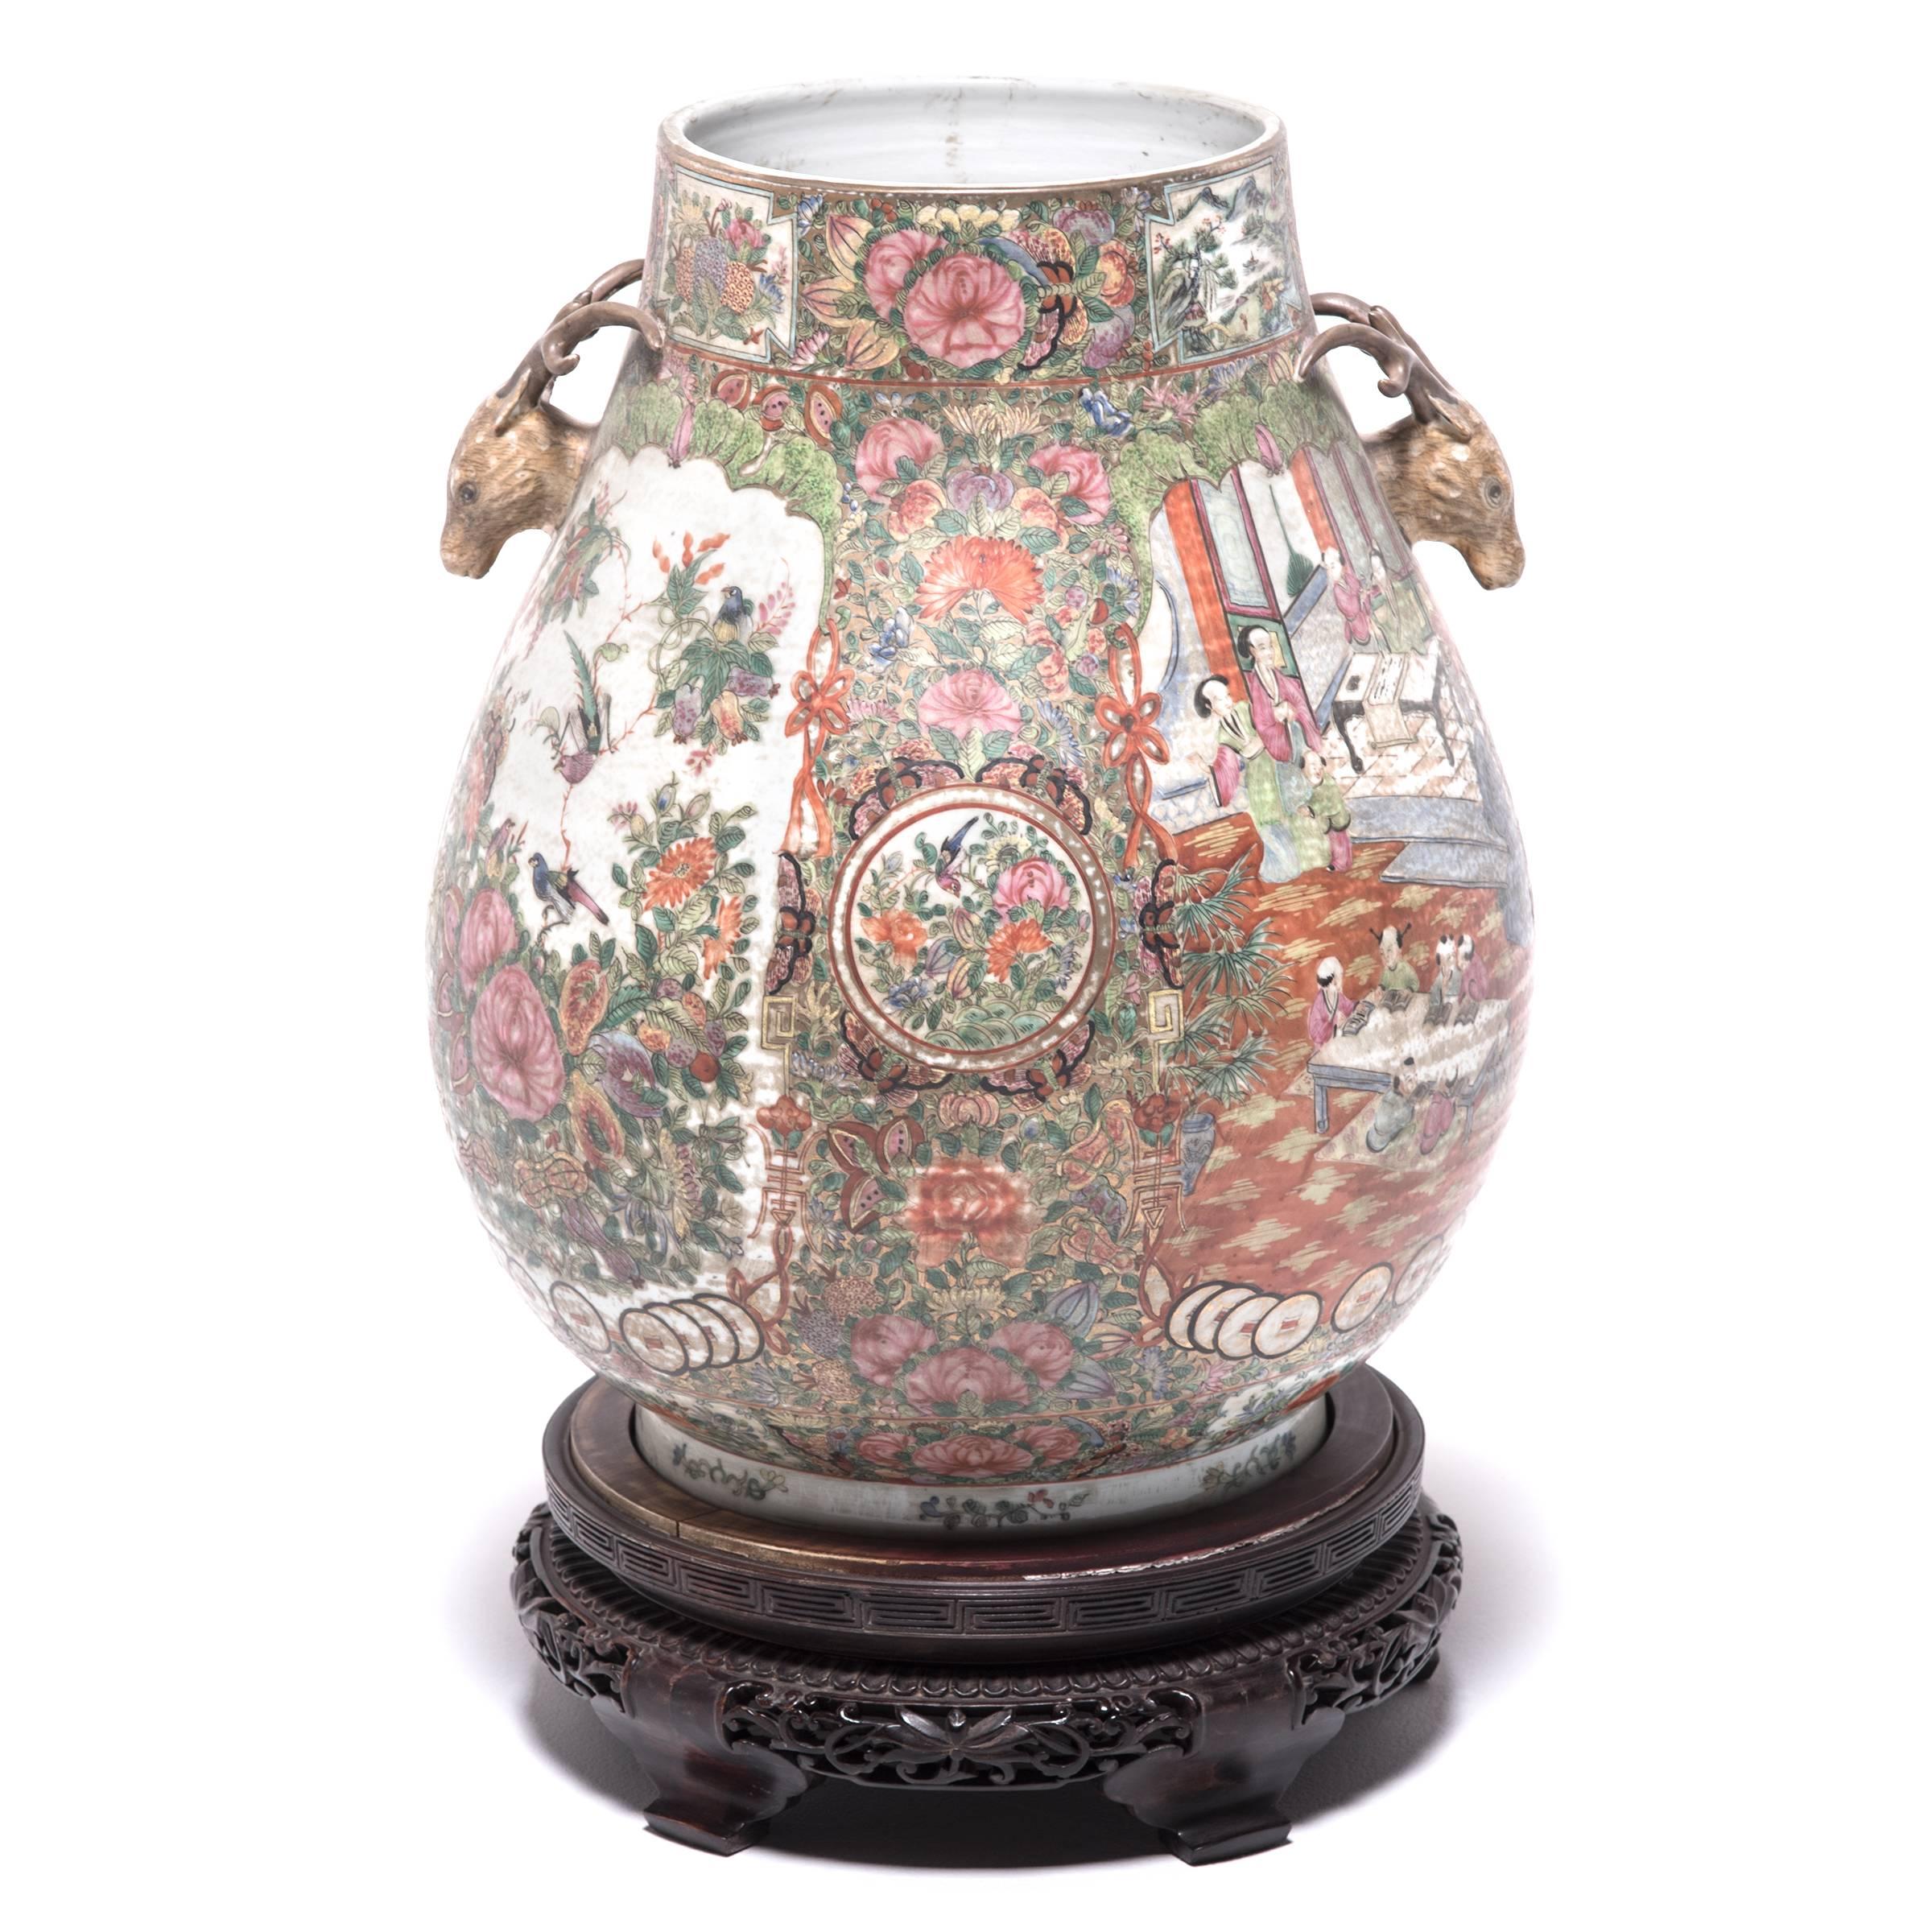 Lavishly detailed and masterfully painted, this pair of vases was acquired from the collection of gentleman who traveled extensively to Shangai in the 1920s. Made in 1900, the monumental hu vases are exquisite examples of the colorful glazes and